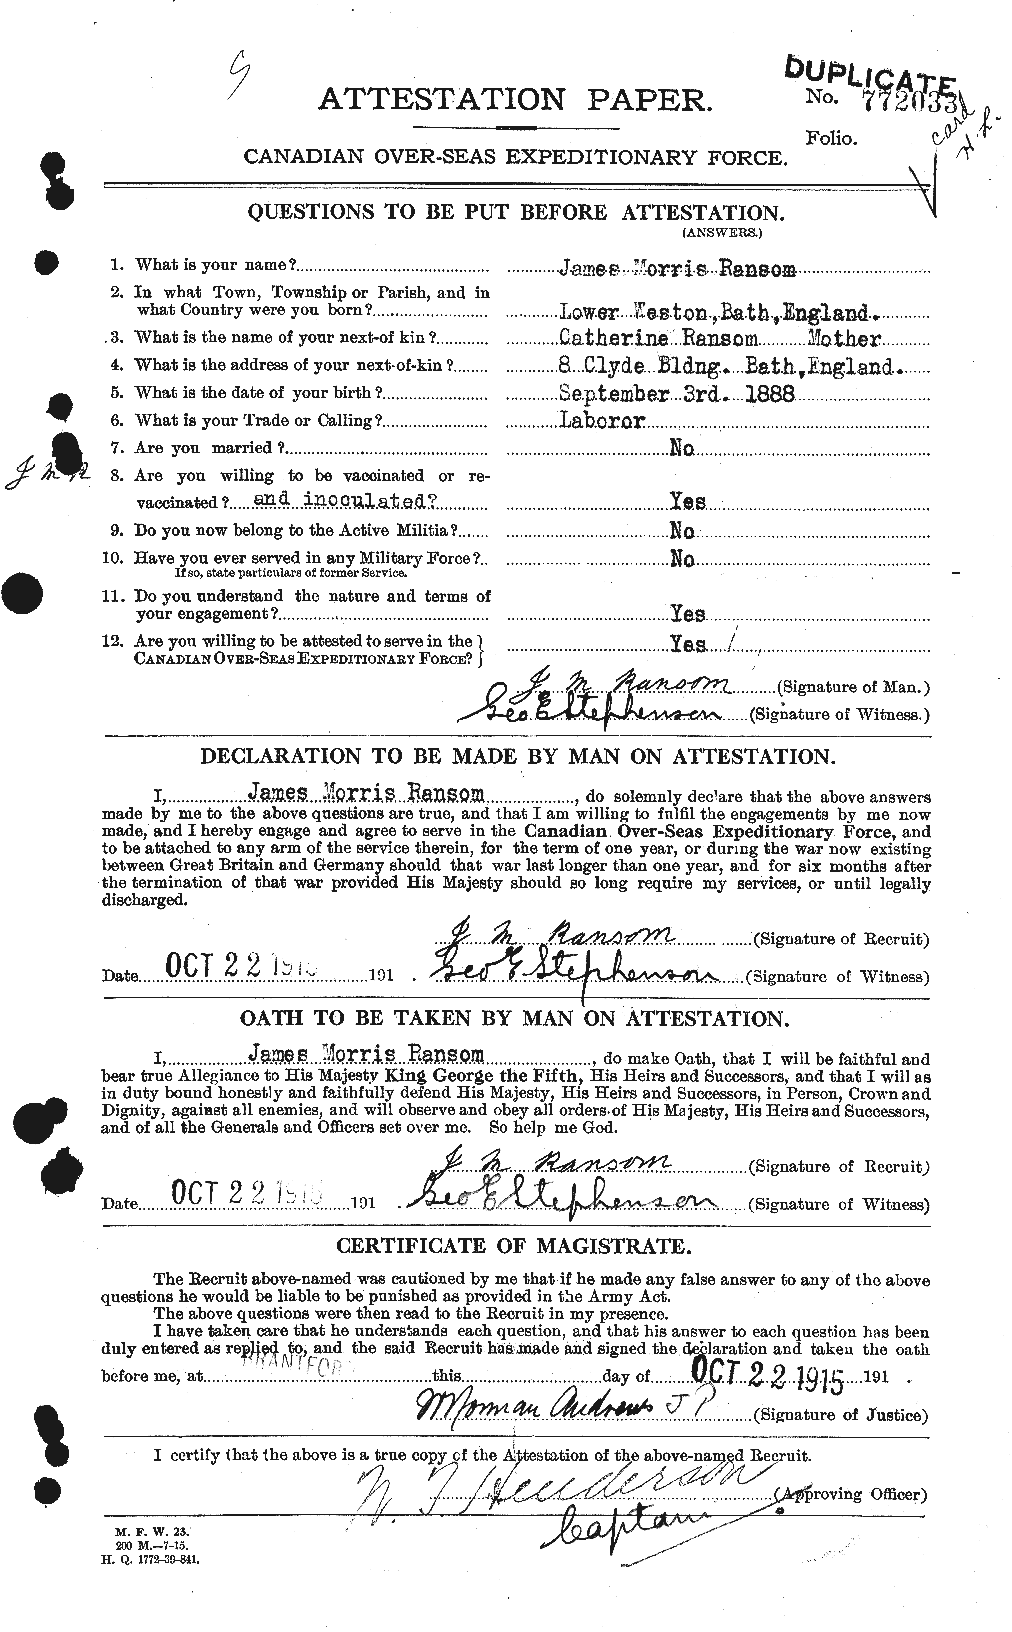 Personnel Records of the First World War - CEF 594886a